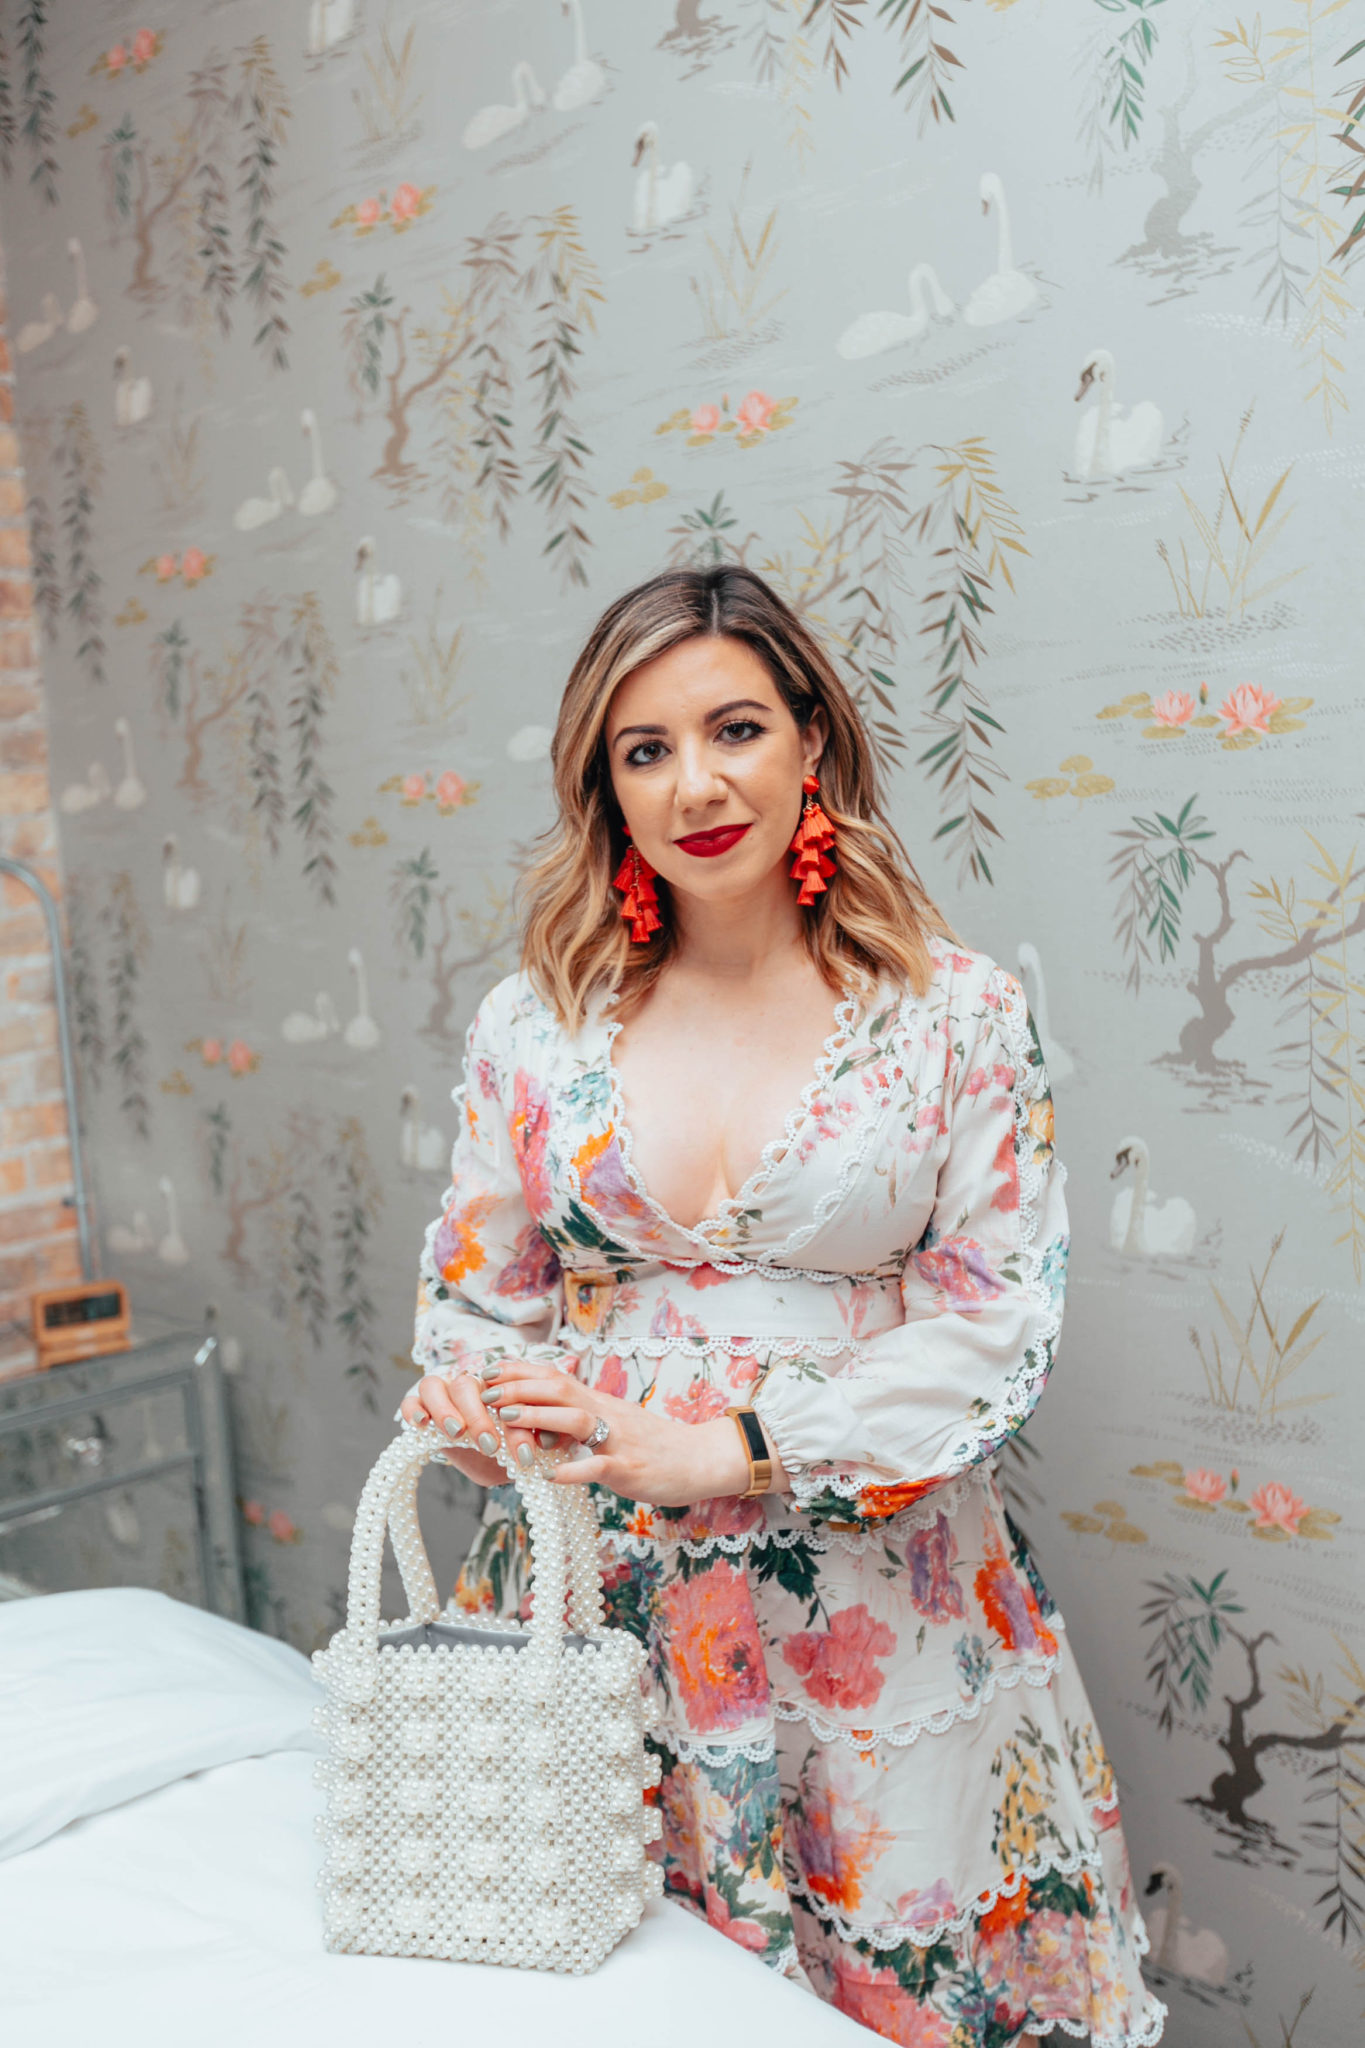 Top US life and style blogger, Glass of Glam, is now halfway through her pregnancy: image of a pregnant woman wearing a Chicwish floral dress, Naturalizer pumps, Mioco beaded bag and Sugarfix statement earrings